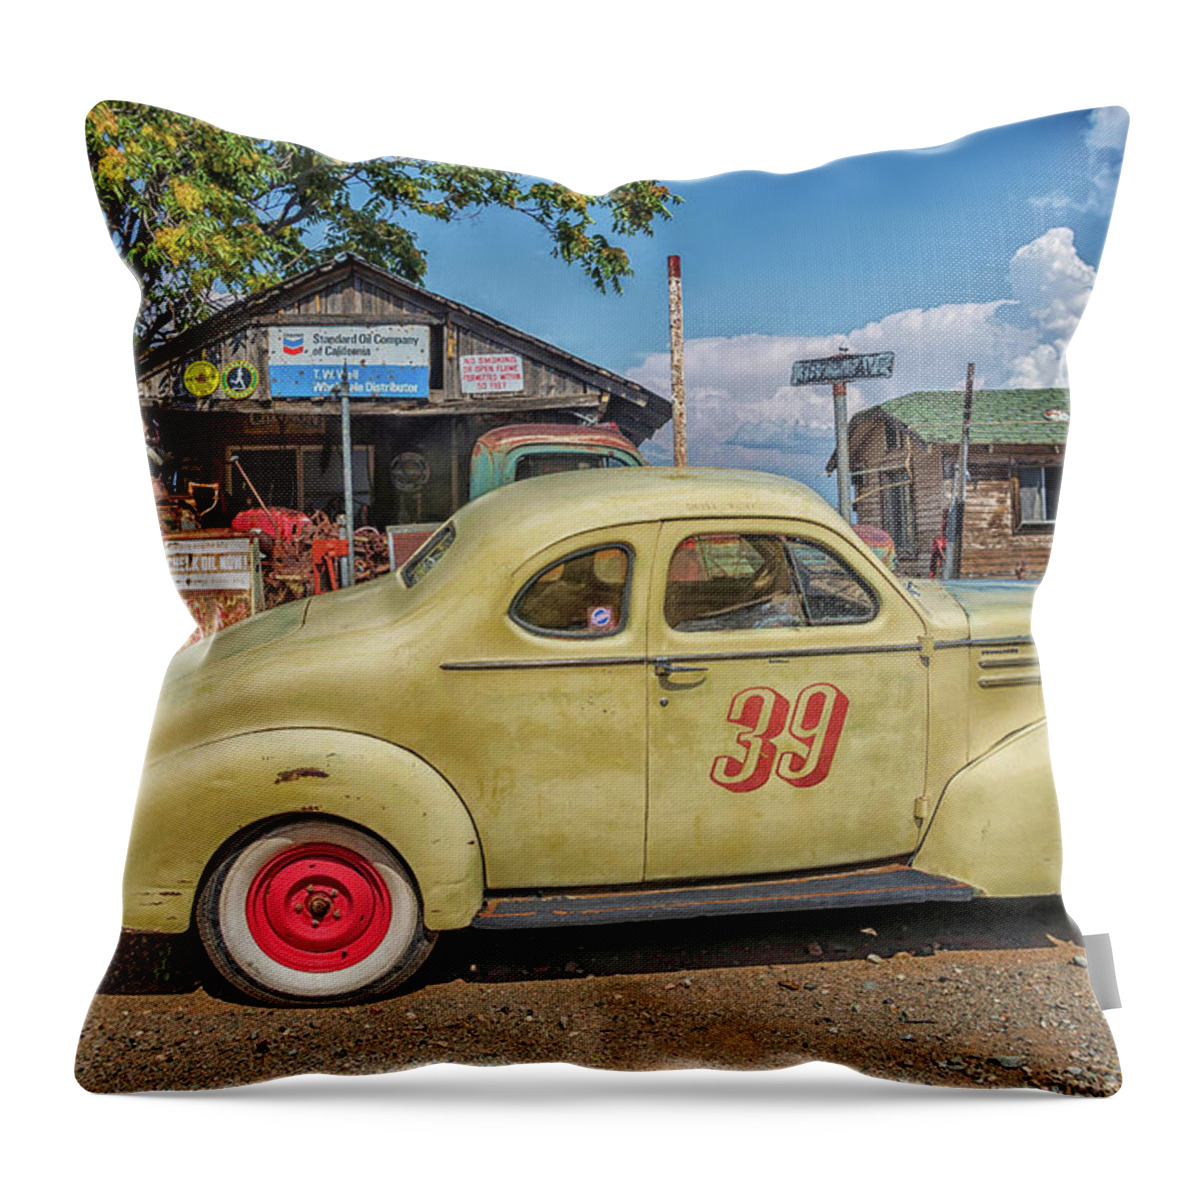 Cars Throw Pillow featuring the photograph Vintage Beauty 2 by Marisa Geraghty Photography